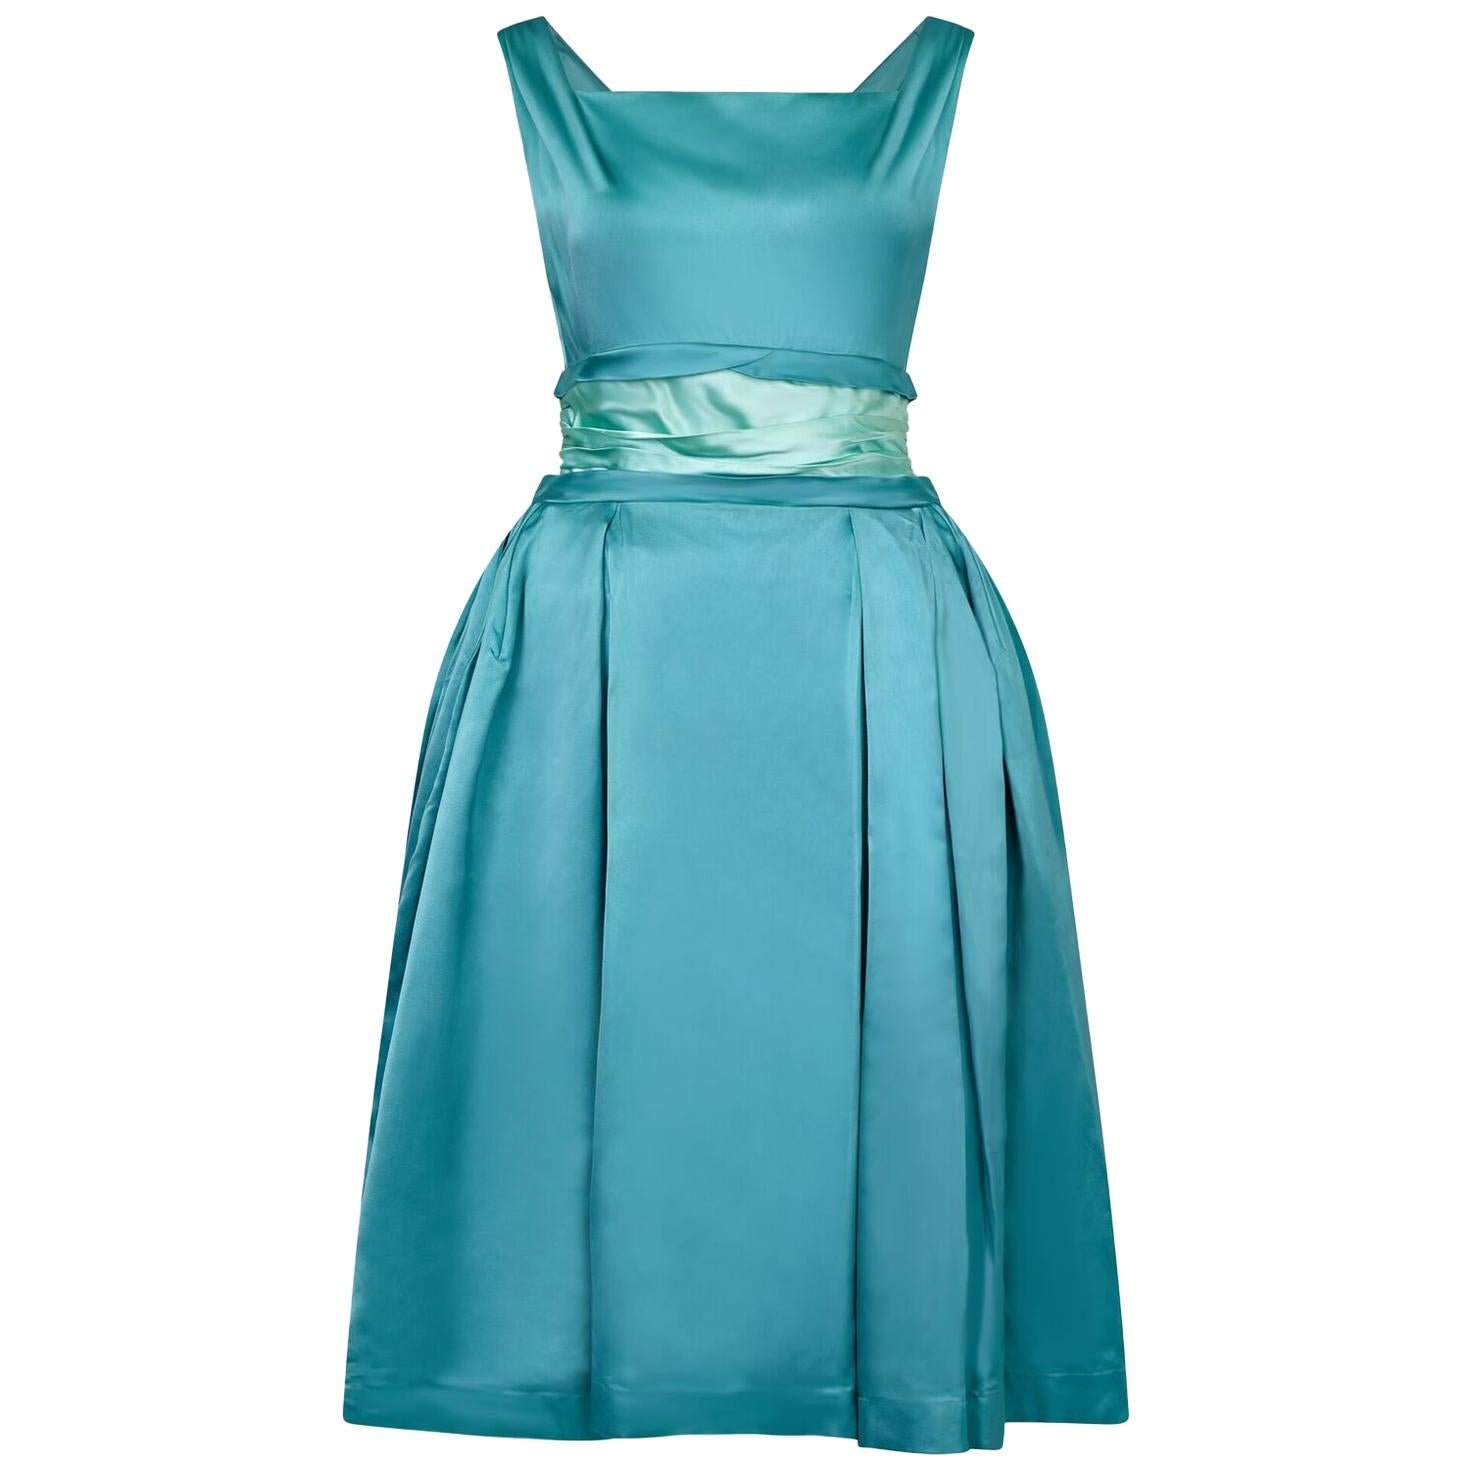 1950s Turquoise Satin Duchess Dress With Corseted Waistband  For Sale